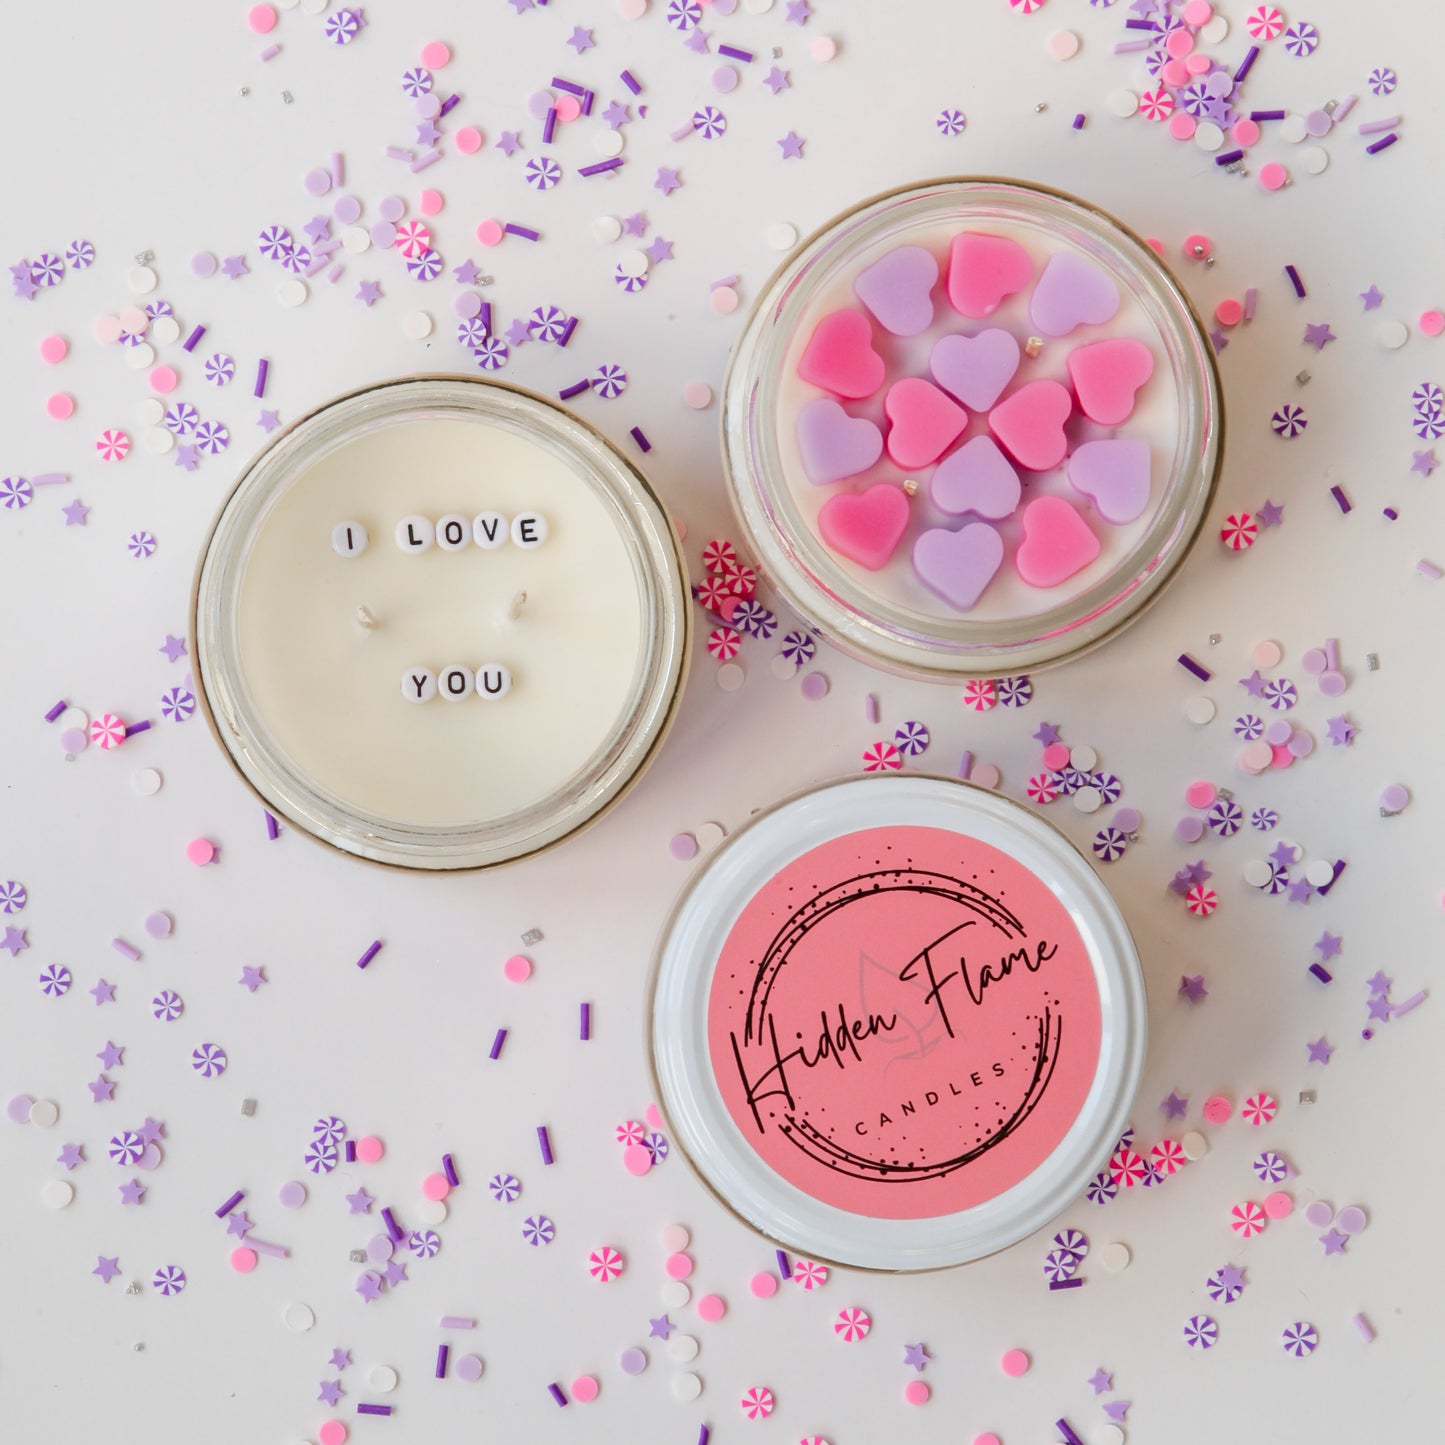 "I love you" Love Heart Candle